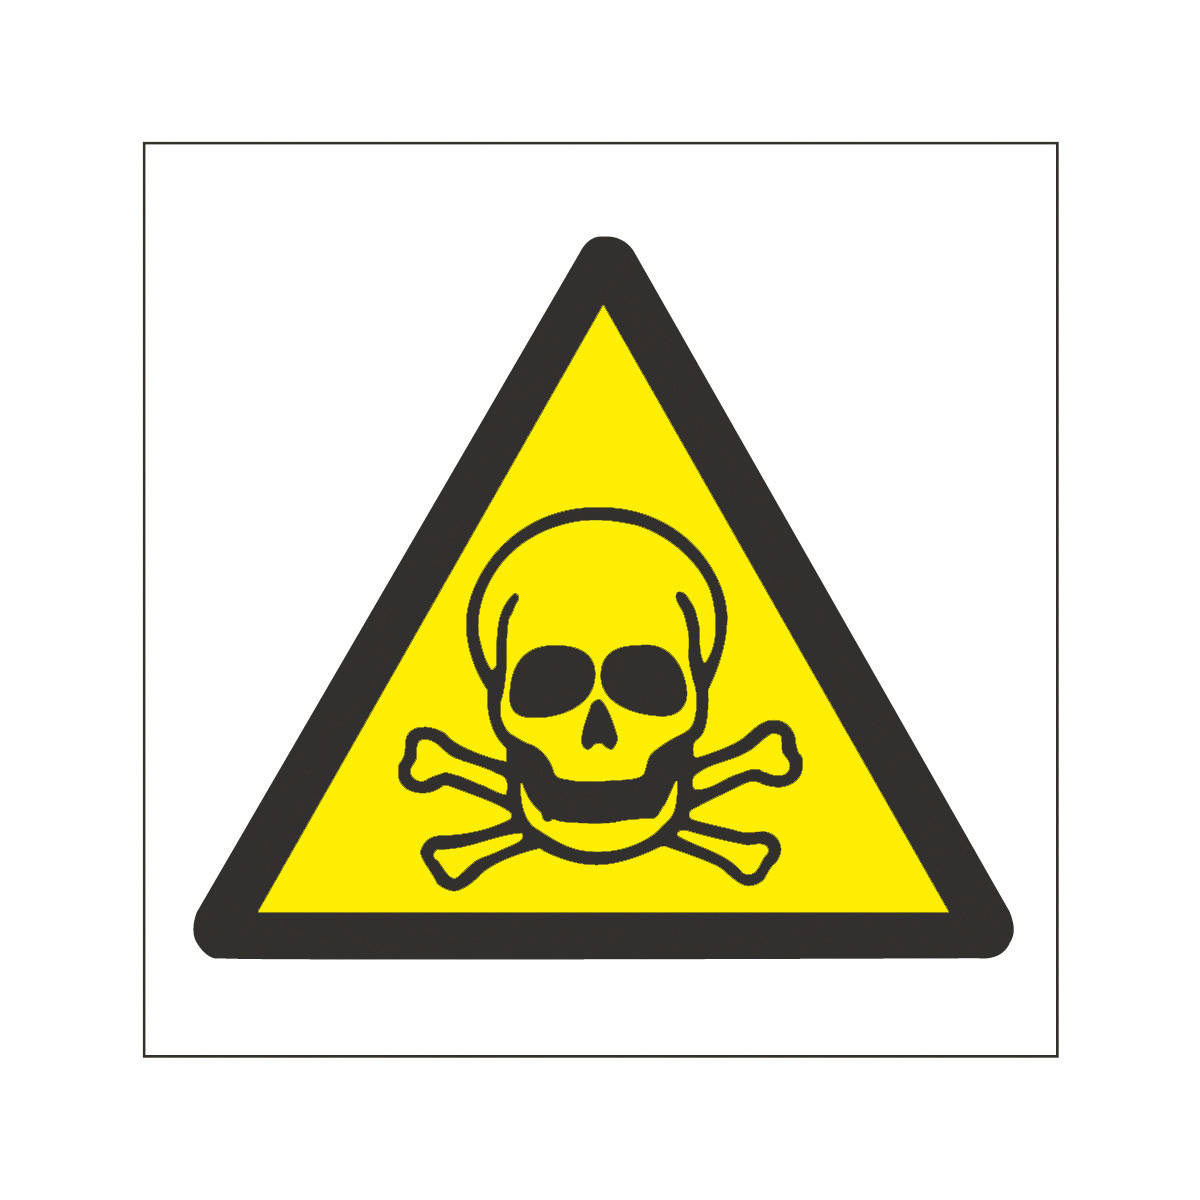 Safety hazard signs and symbols car tuning | Chainimage